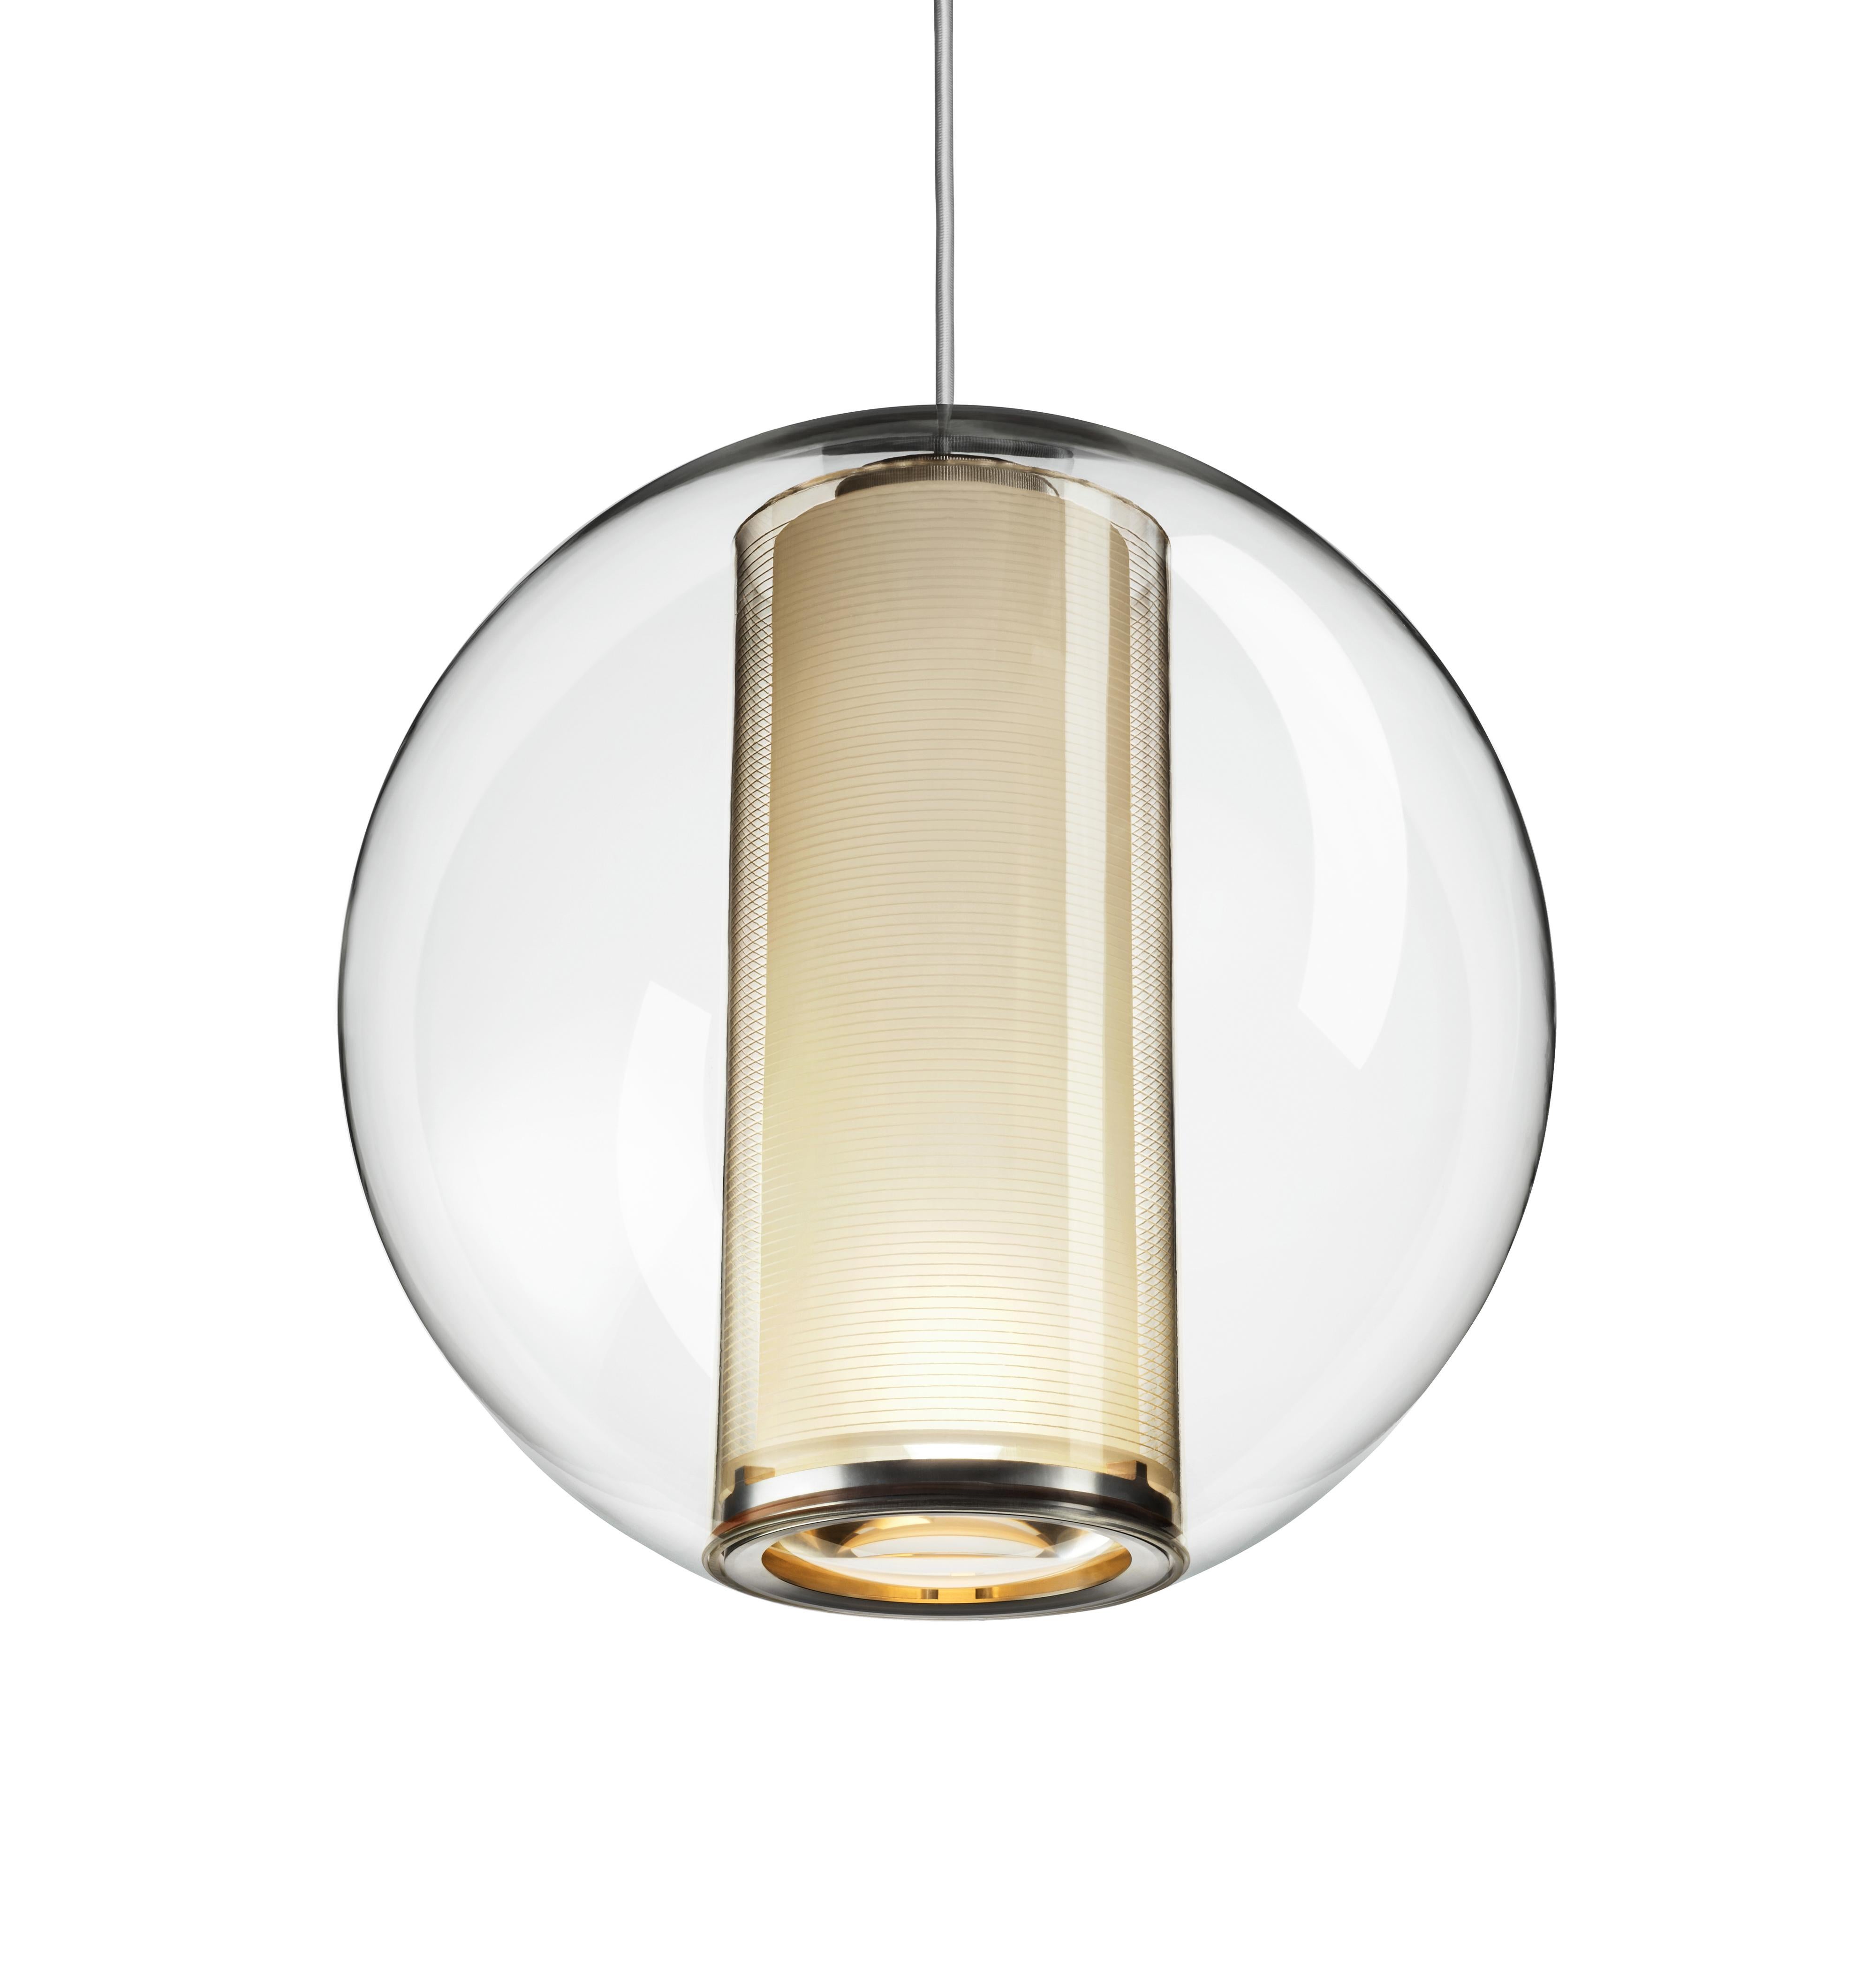 Bel Occhio pendant is a study in weightlessness and transparency. Its inner column suspends freely within a clear acrylic shell and provides both ambient and focused illumination. Available with orange or white diffuser.

Features:
Full range